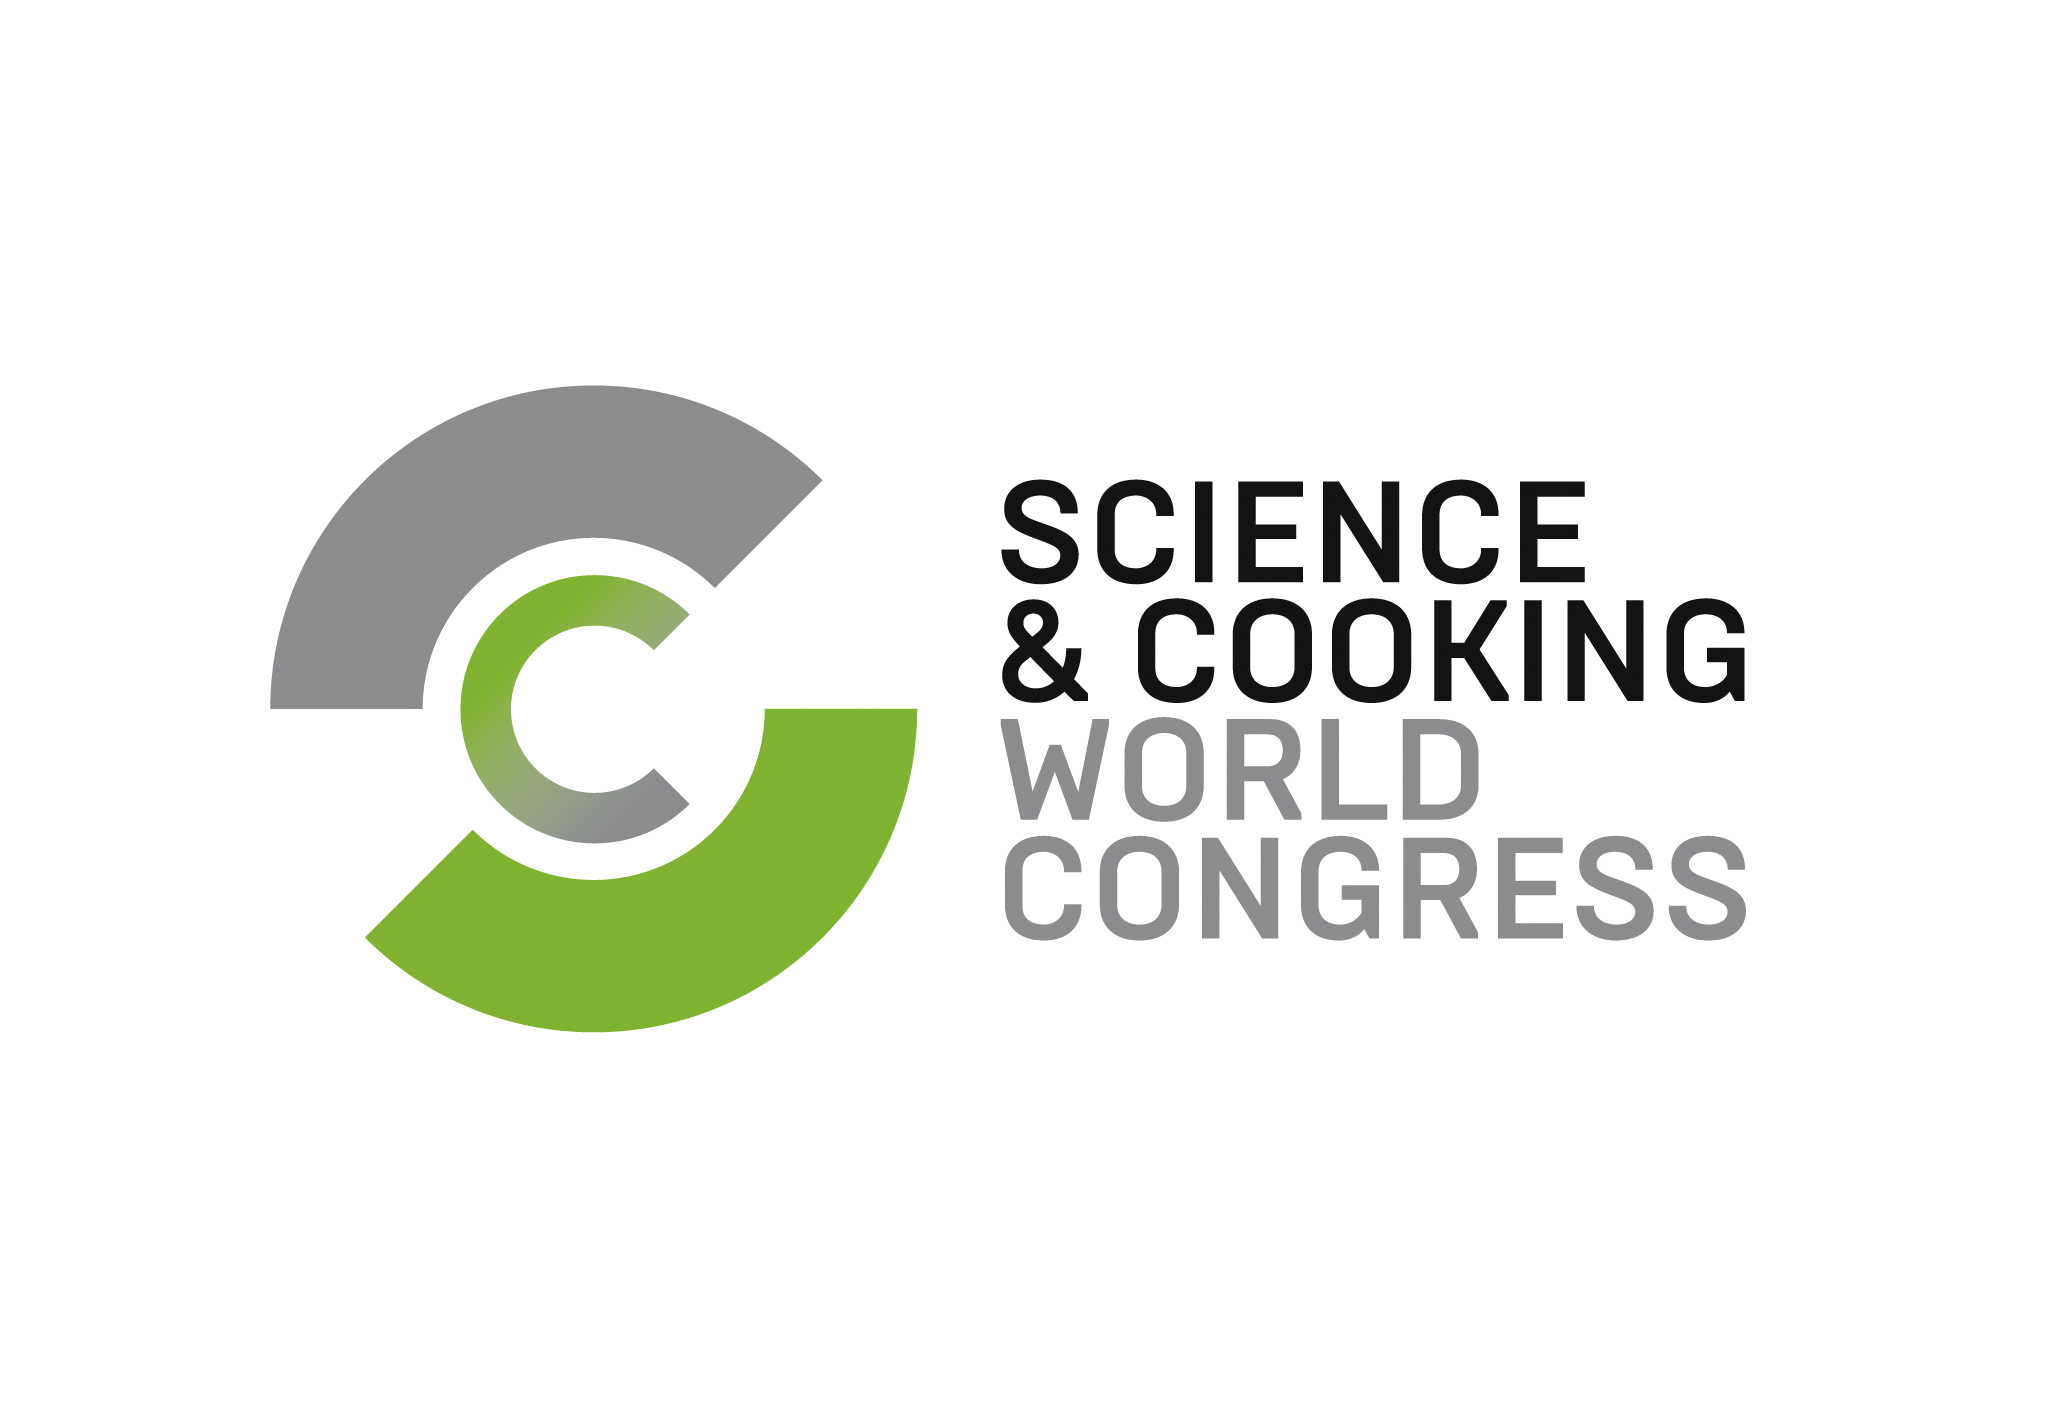 Bioengineering Science and Cooking Course obtains international recognition